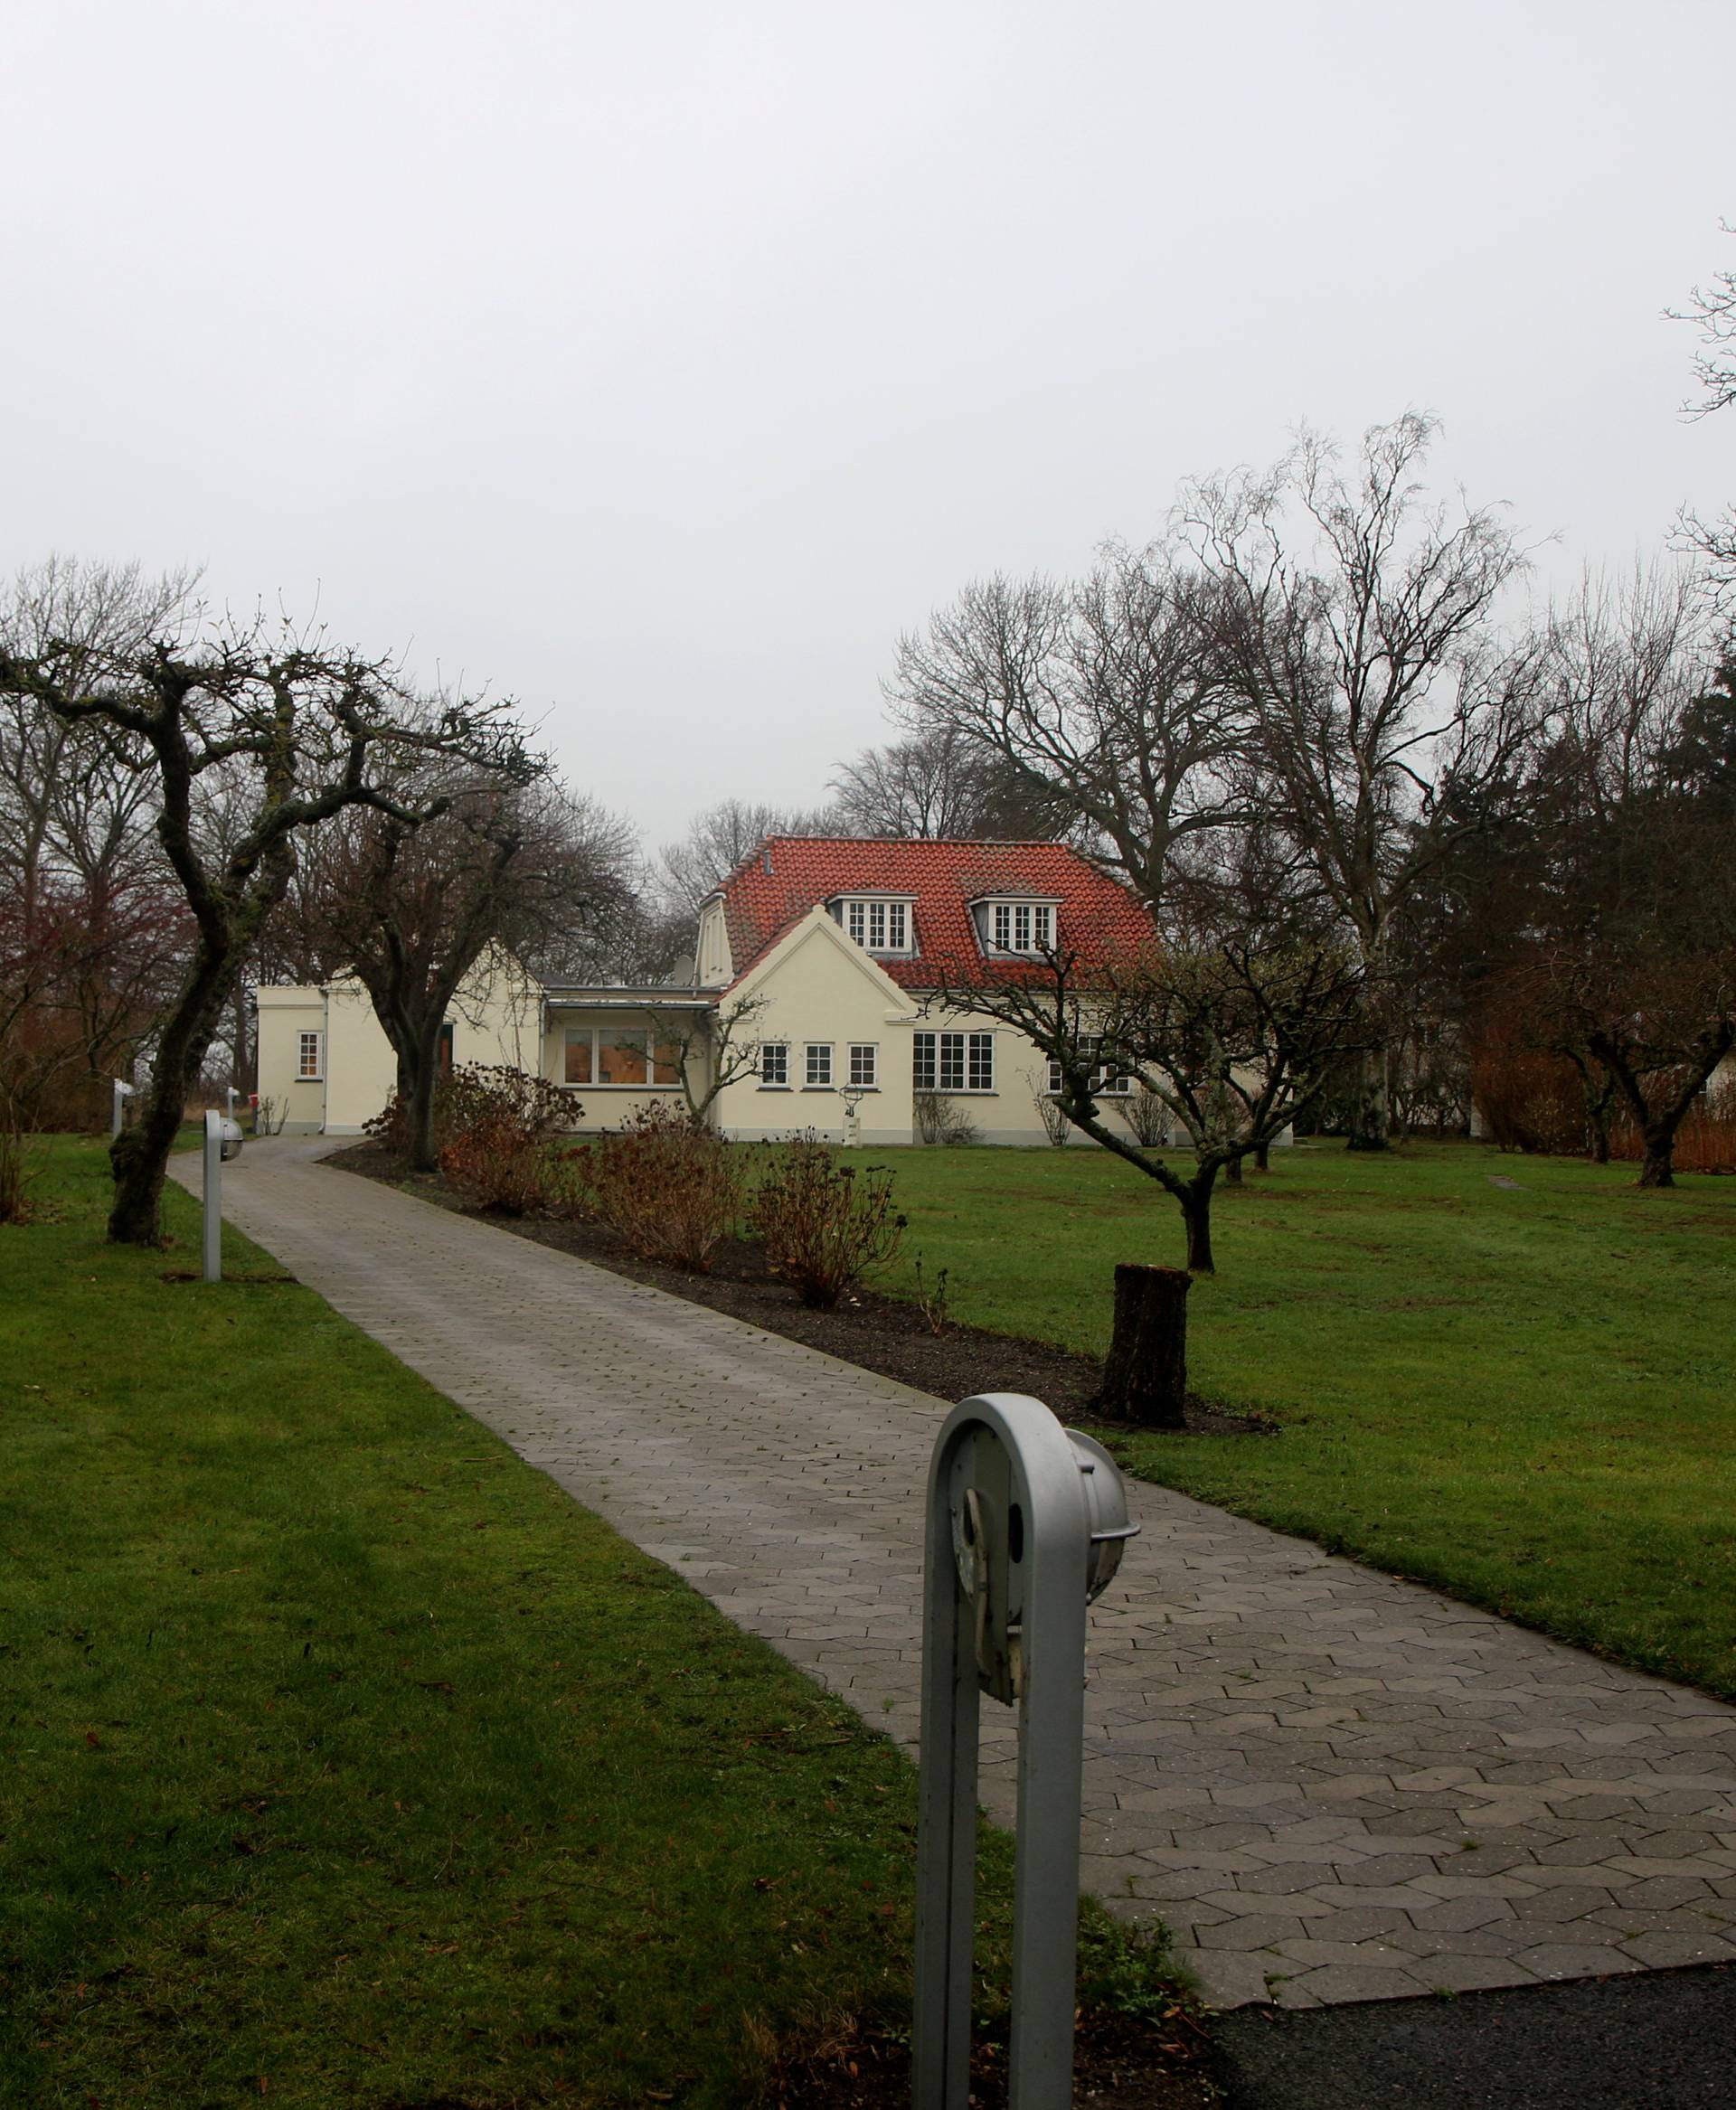 Buildings are seen on Lindholm Island